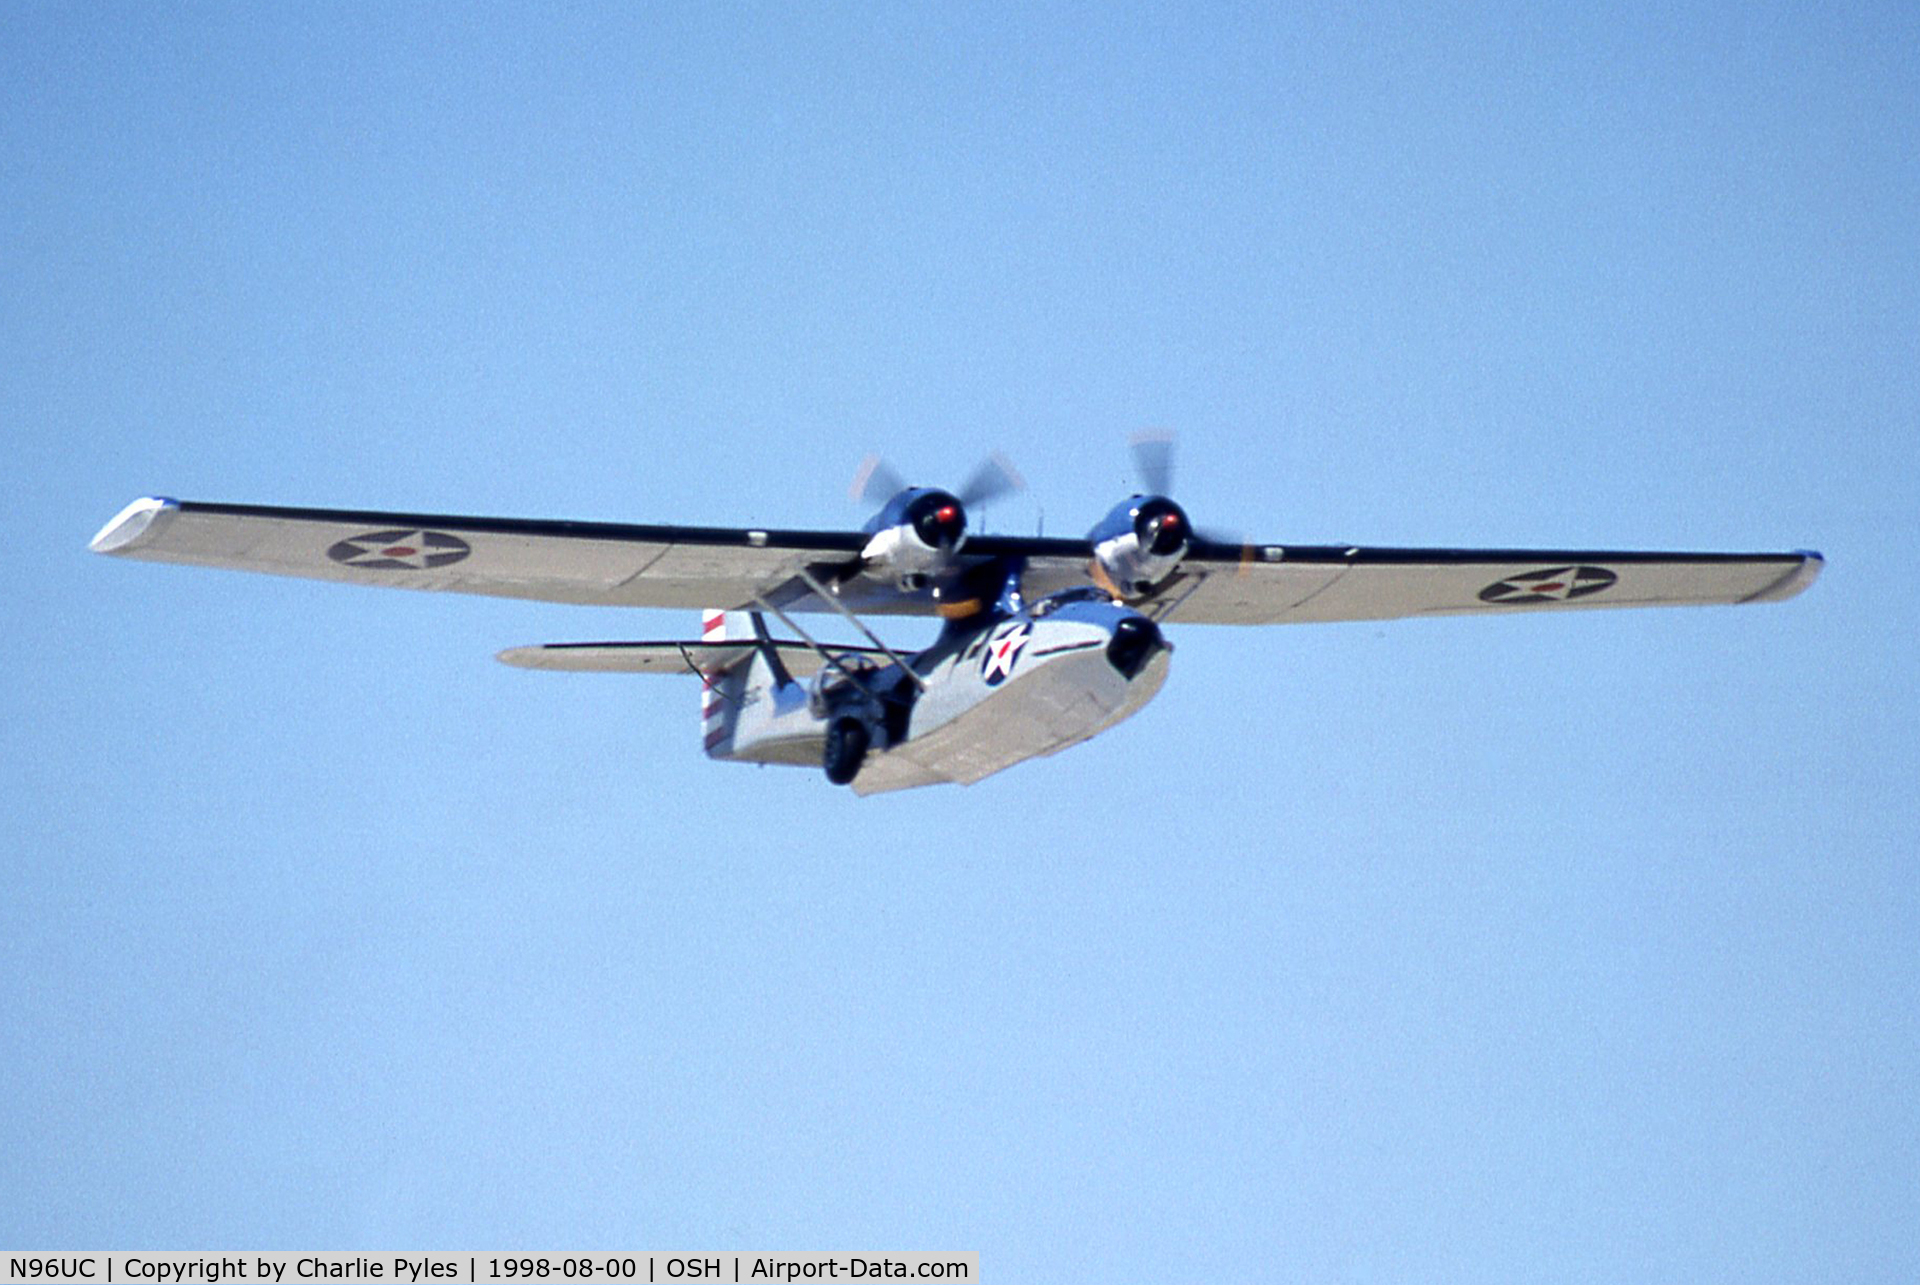 N96UC, 1944 Consolidated PBY-5A Catalina C/N 48375, One of my favorite airplanes of all time.